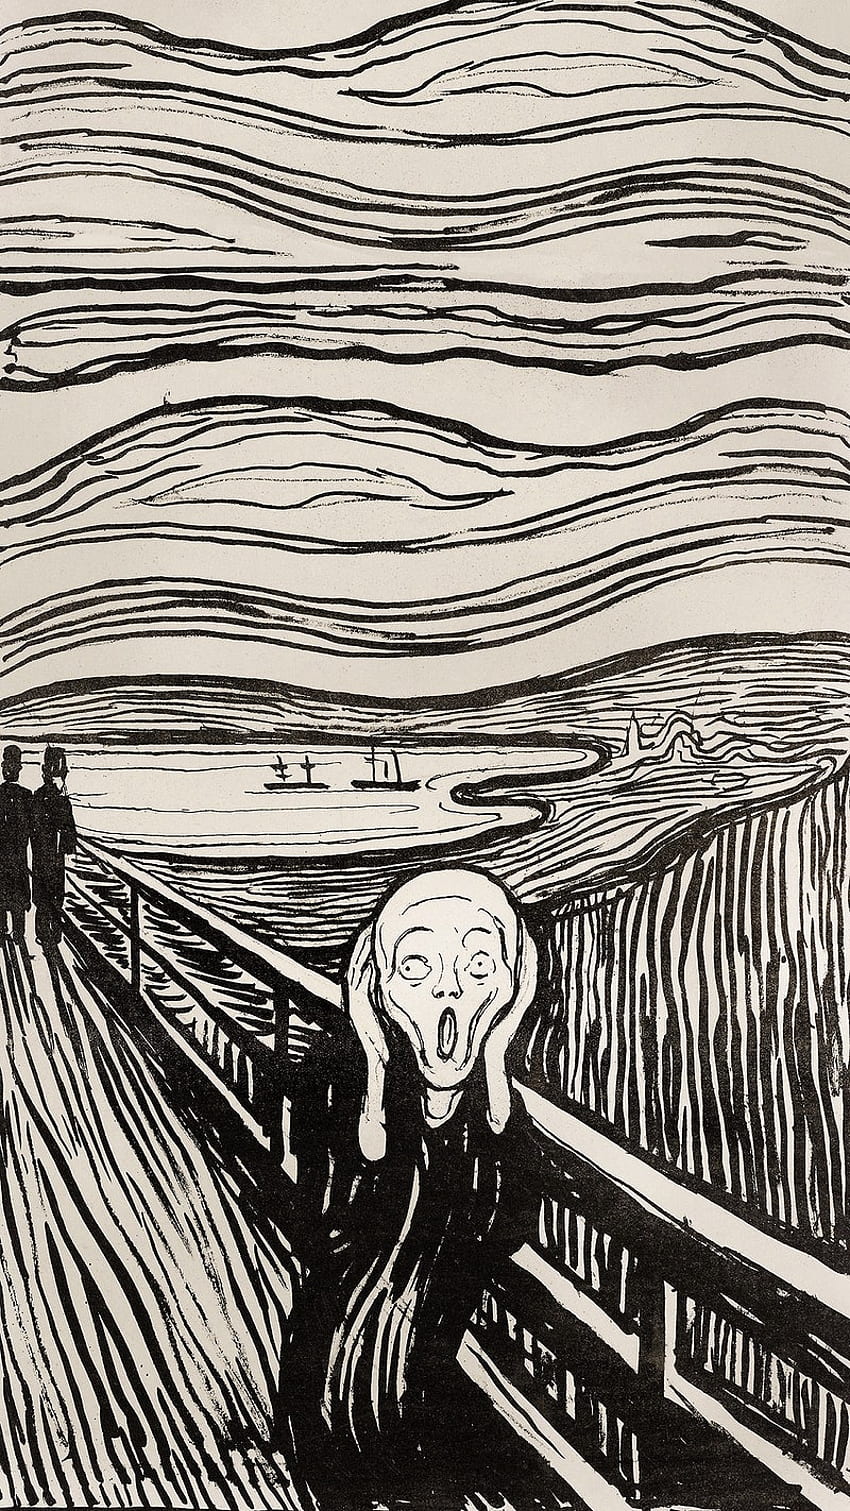 The Scream Painting . , PNG Stickers, & Background, Munch Scream HD phone wallpaper